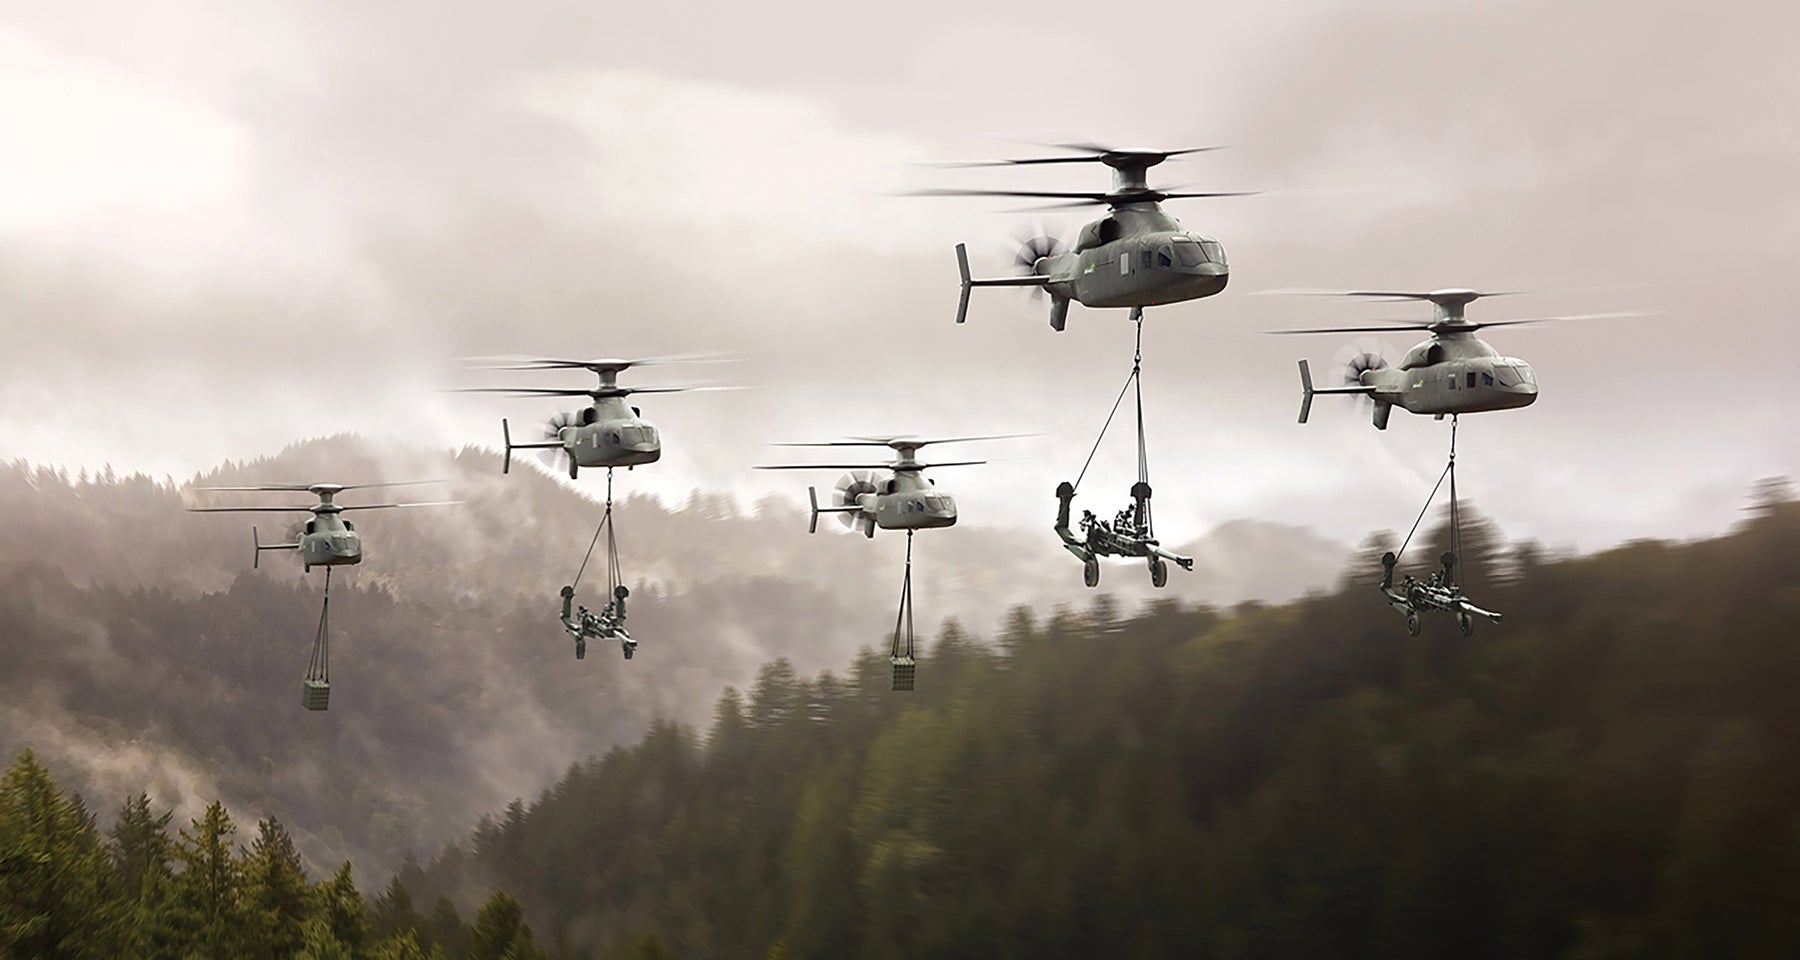 The Defiant X aircraft, built by Sikorsky and Boeing, is also competing to be the Army’s Future Long-Range Assault Aircraft. (Credit: Lockheed Martin photo illustration)